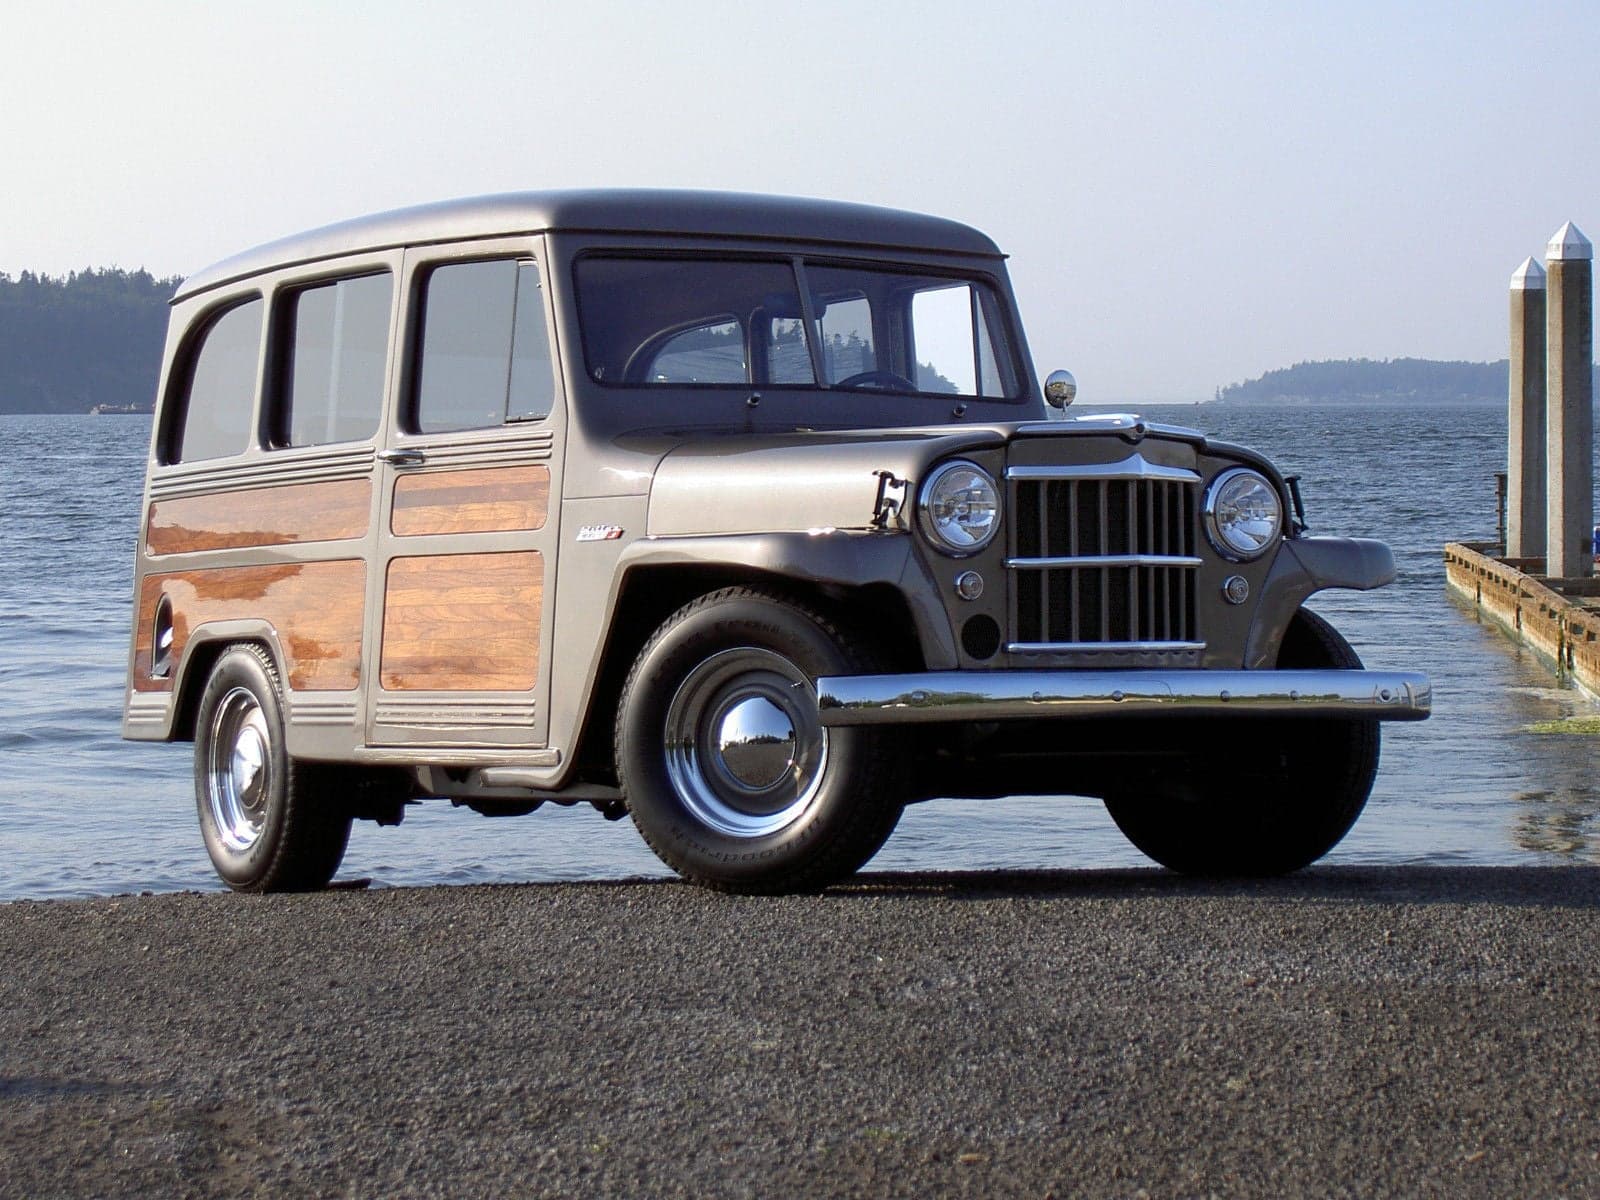 This 1953 Willys Wagon SRT8 Is a Reinvented Restomod